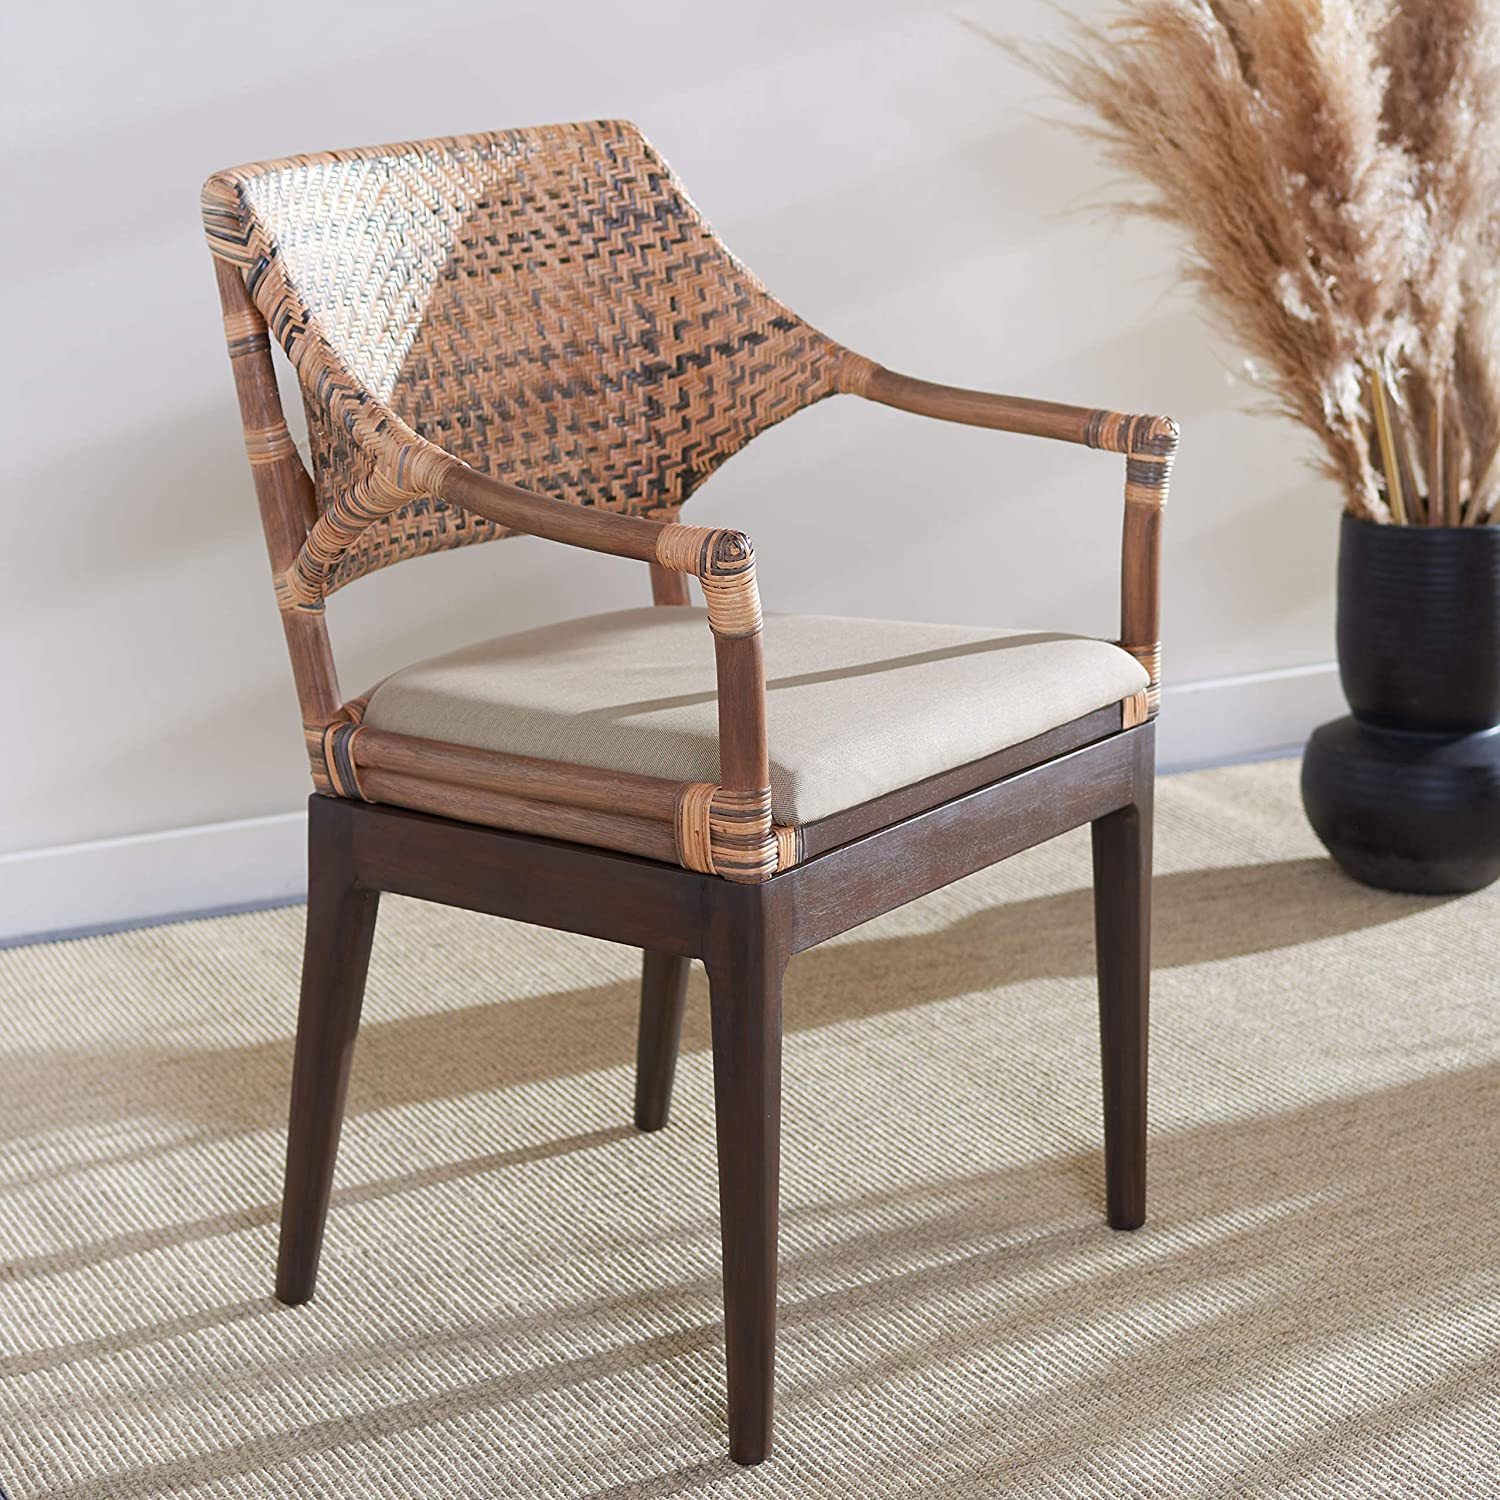 Carlo Arm Chair, Honey, From The Safavieh Home Collection. - $373.96